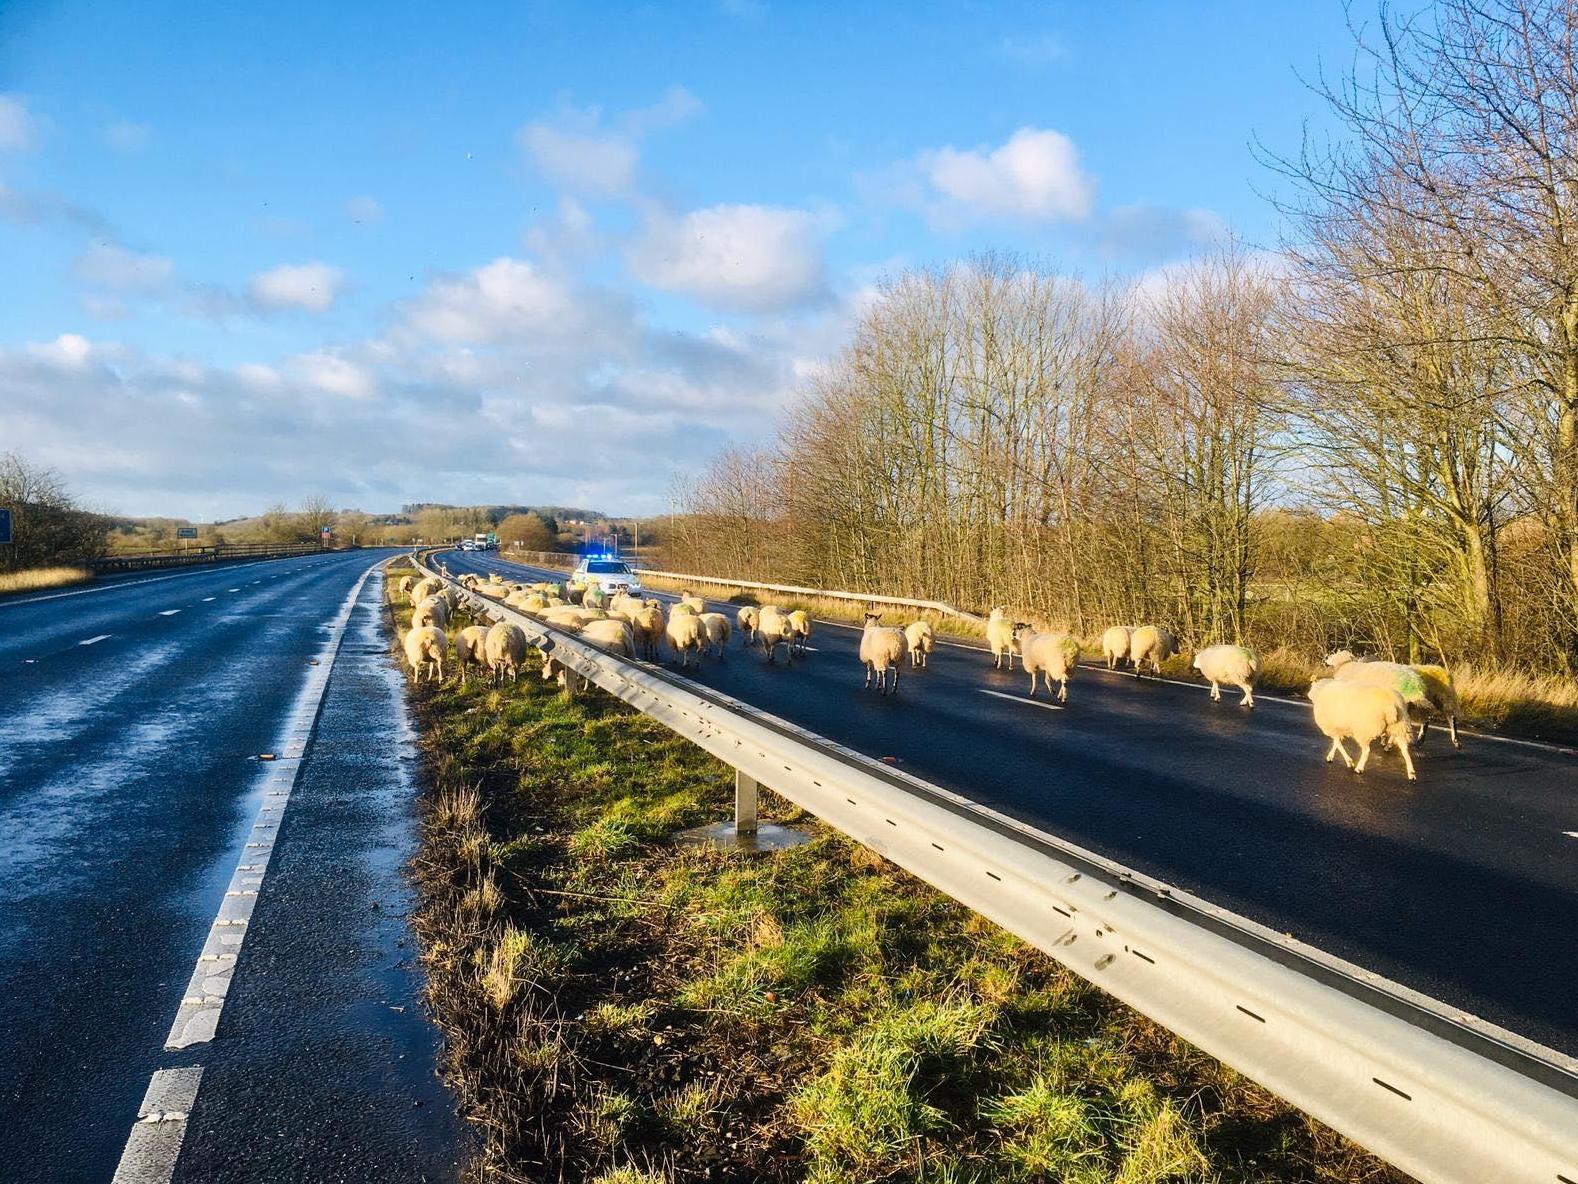 A large flock of sheep block both lanes on dual carriageway near Tadcaster